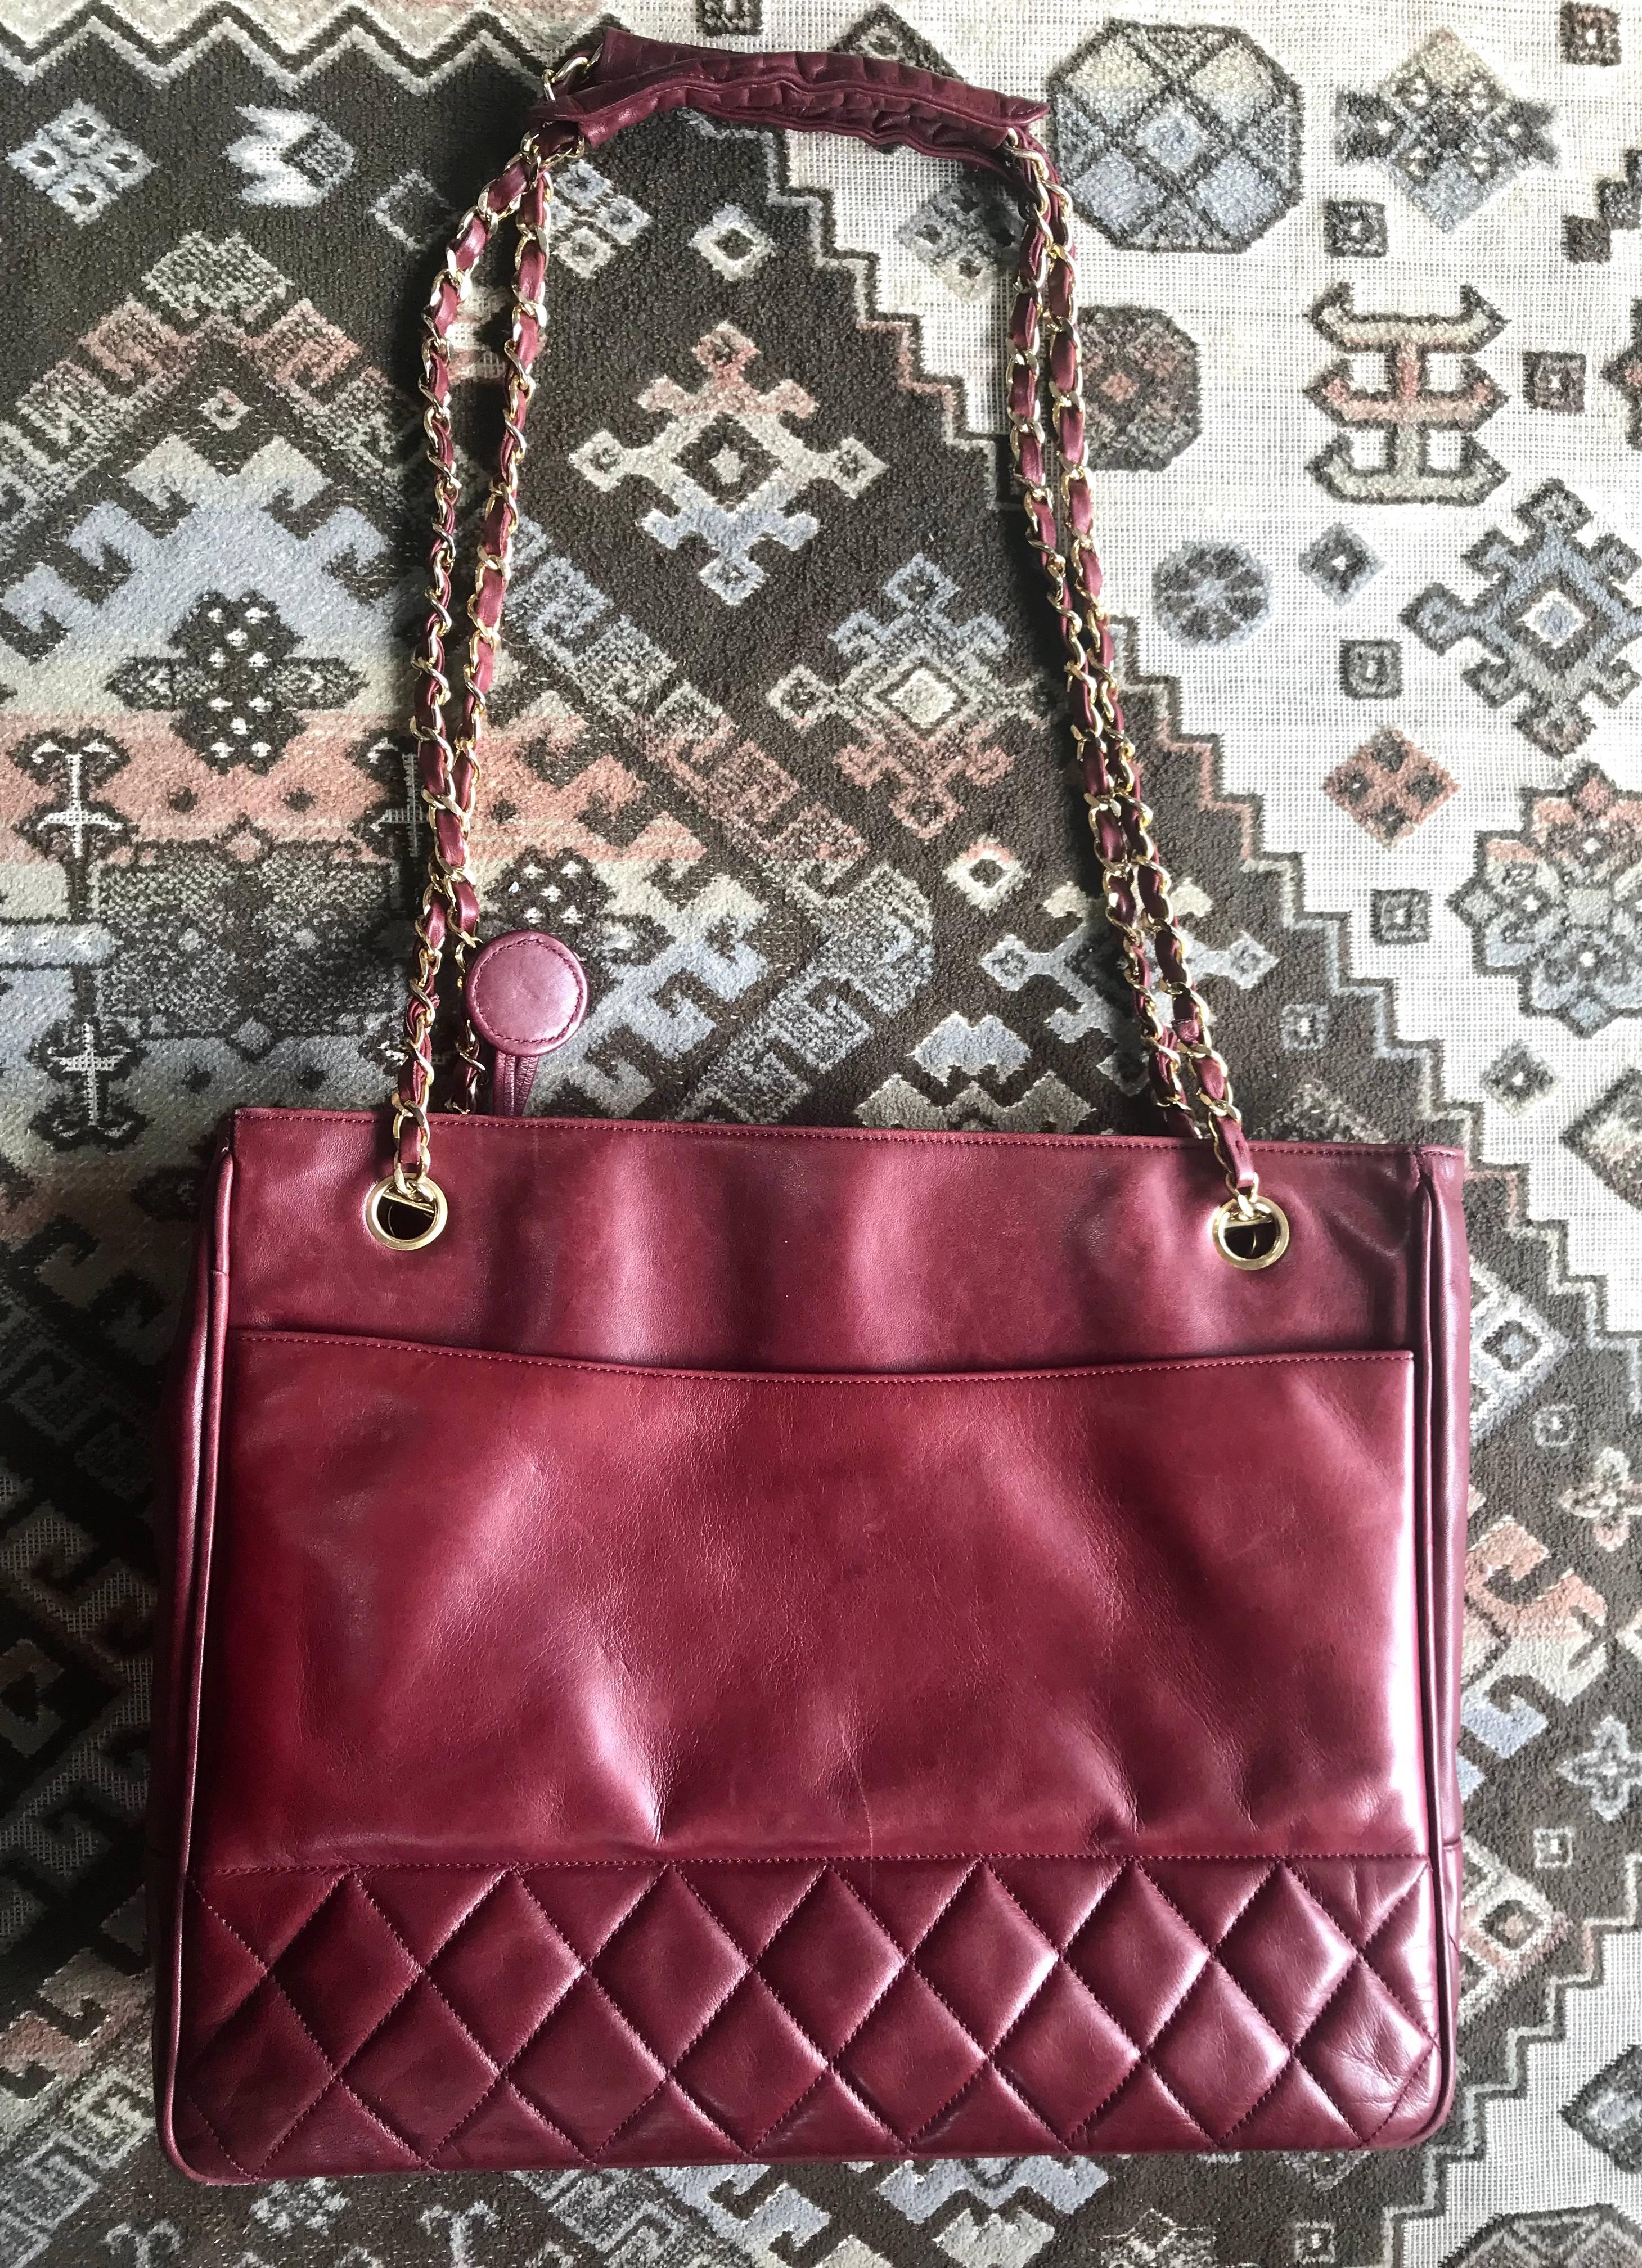 Pink Chanel Vintage wine leather tote bag with gold chain handles and CC motif charm For Sale